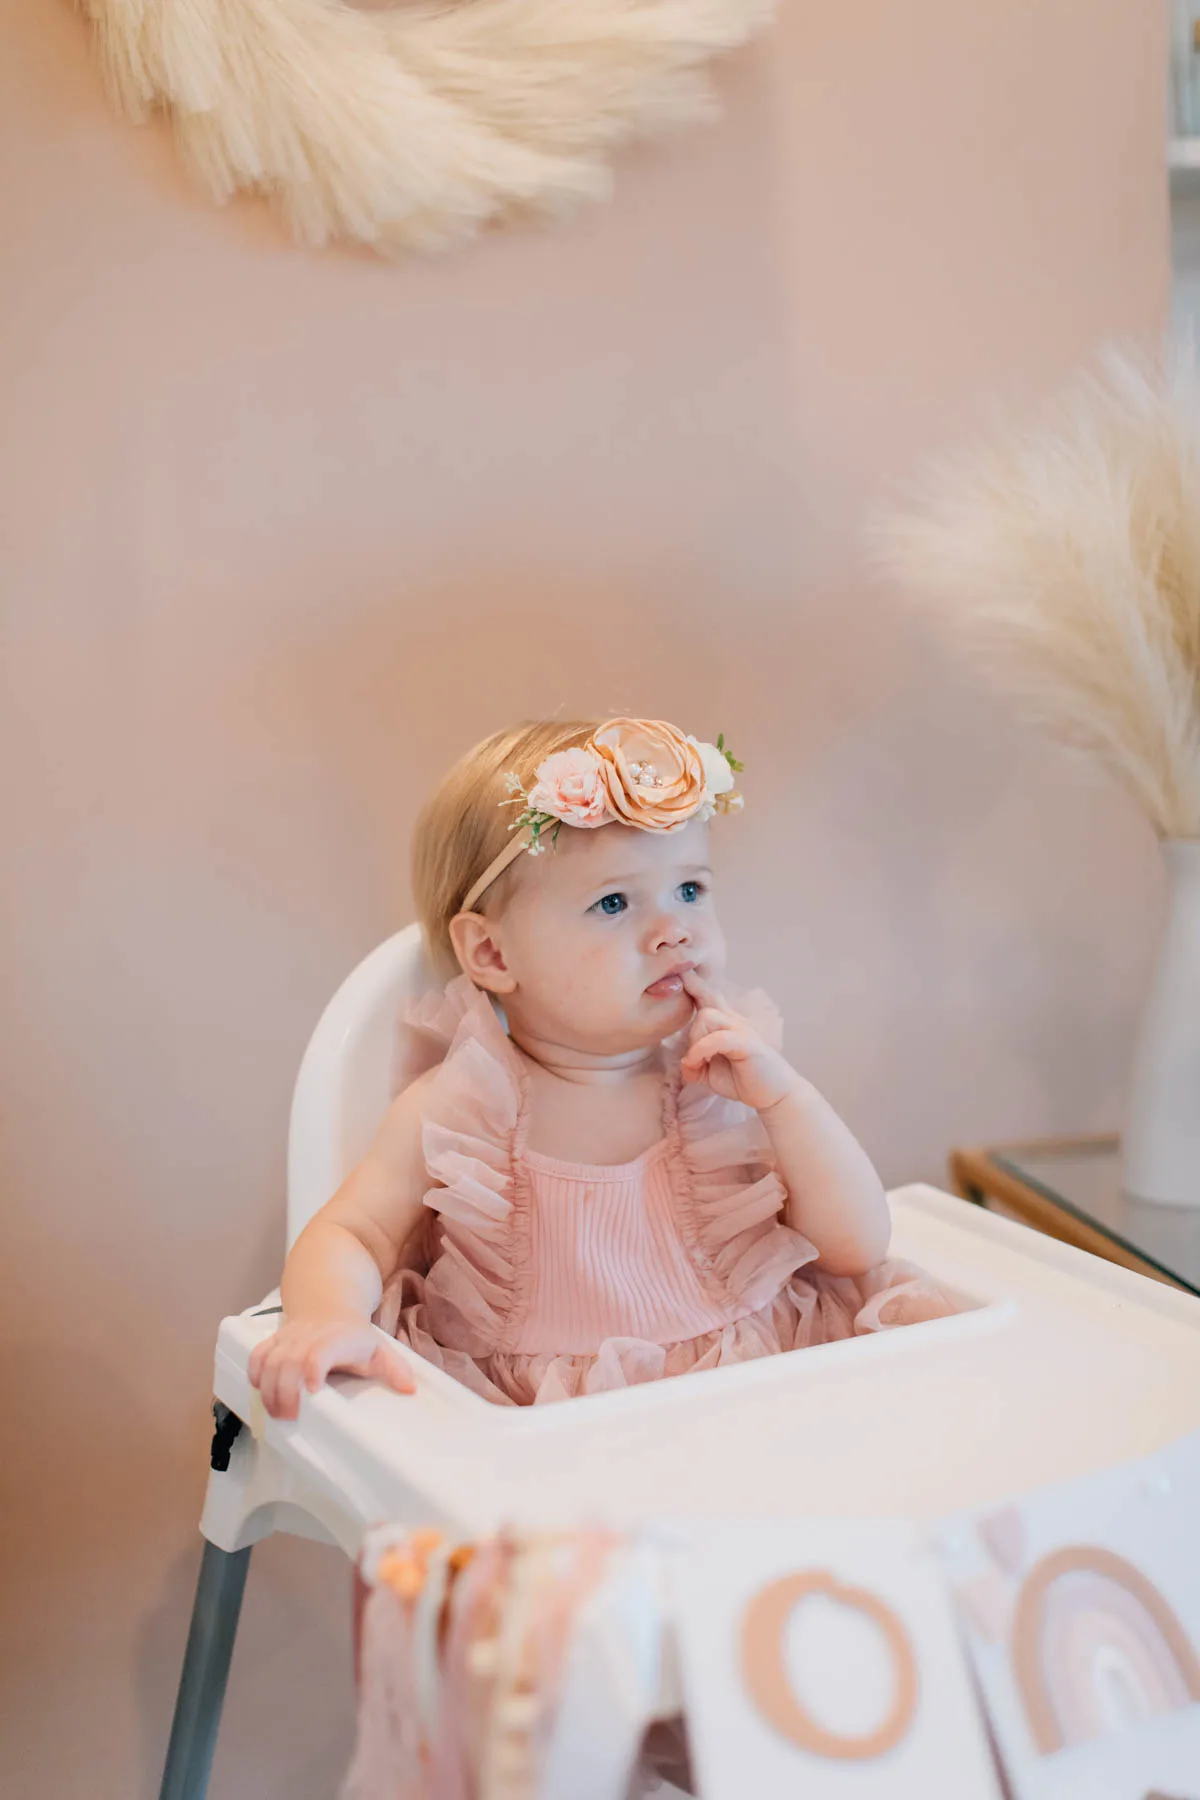 Baby girl wearing pink tulle dress and floral headband sits in white high chair.